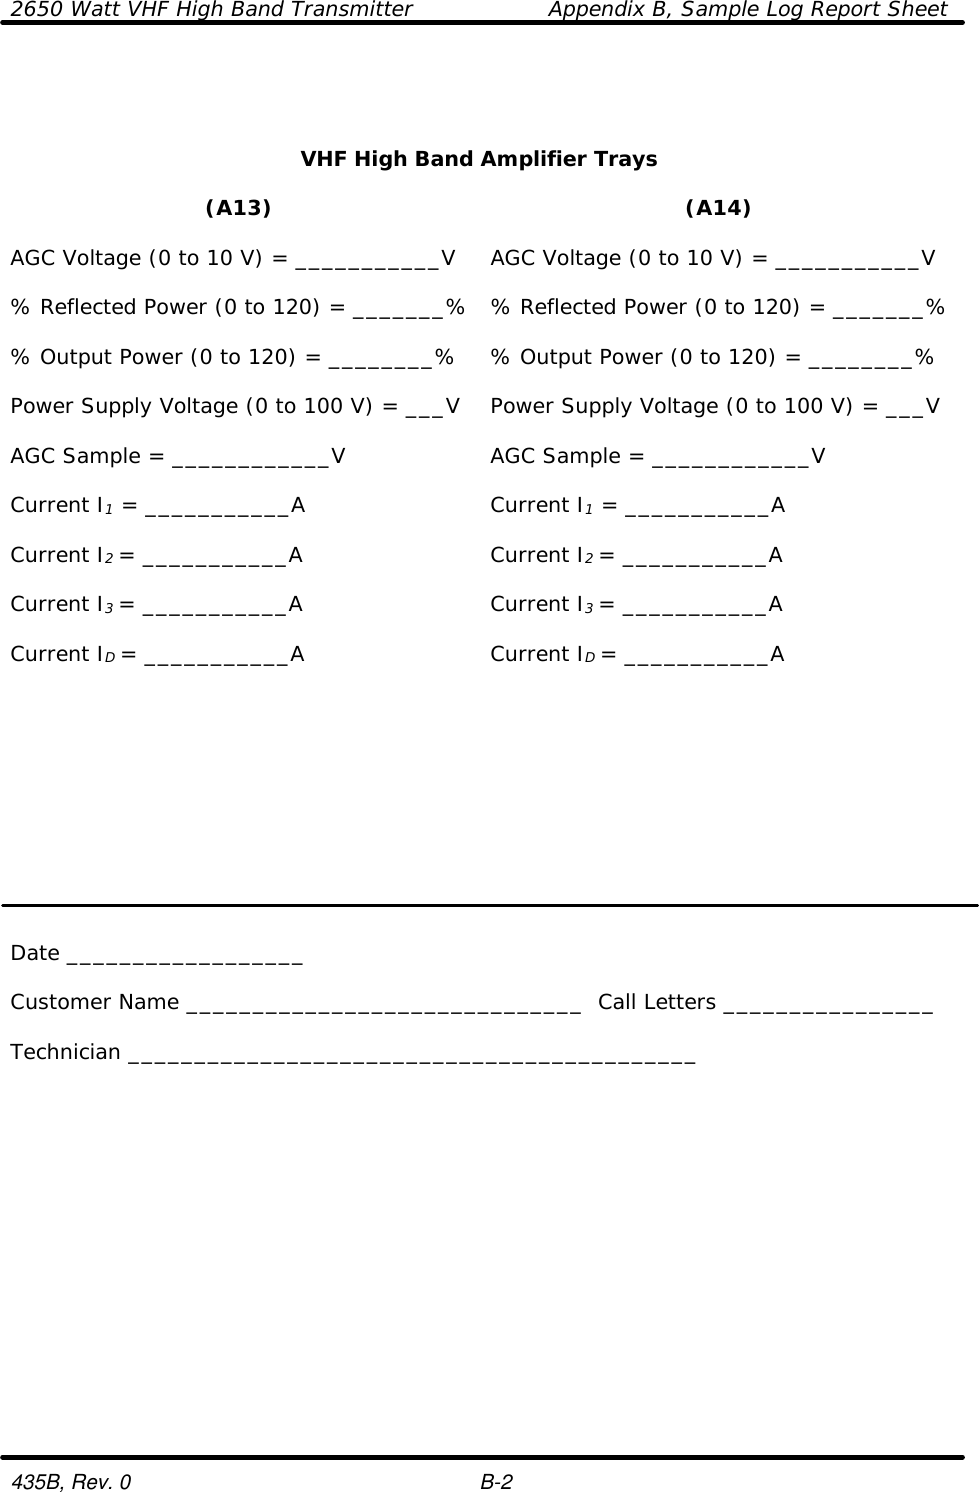 2650 Watt VHF High Band Transmitter    Appendix B, Sample Log Report Sheet  435B, Rev. 0    B-2    VHF High Band Amplifier Trays    (A13) (A14)    AGC Voltage (0 to 10 V) = ___________V AGC Voltage (0 to 10 V) = ___________V    % Reflected Power (0 to 120) = _______% % Reflected Power (0 to 120) = _______%    % Output Power (0 to 120) = ________% % Output Power (0 to 120) = ________%    Power Supply Voltage (0 to 100 V) = ___V Power Supply Voltage (0 to 100 V) = ___V    AGC Sample = ____________V AGC Sample = ____________V    Current I1 = ___________A Current I1 = ___________A    Current I2 = ___________A Current I2 = ___________A    Current I3 = ___________A Current I3 = ___________A    Current ID = ___________A Current ID = ___________A               Date __________________  Customer Name ______________________________  Call Letters ________________  Technician ___________________________________________ 